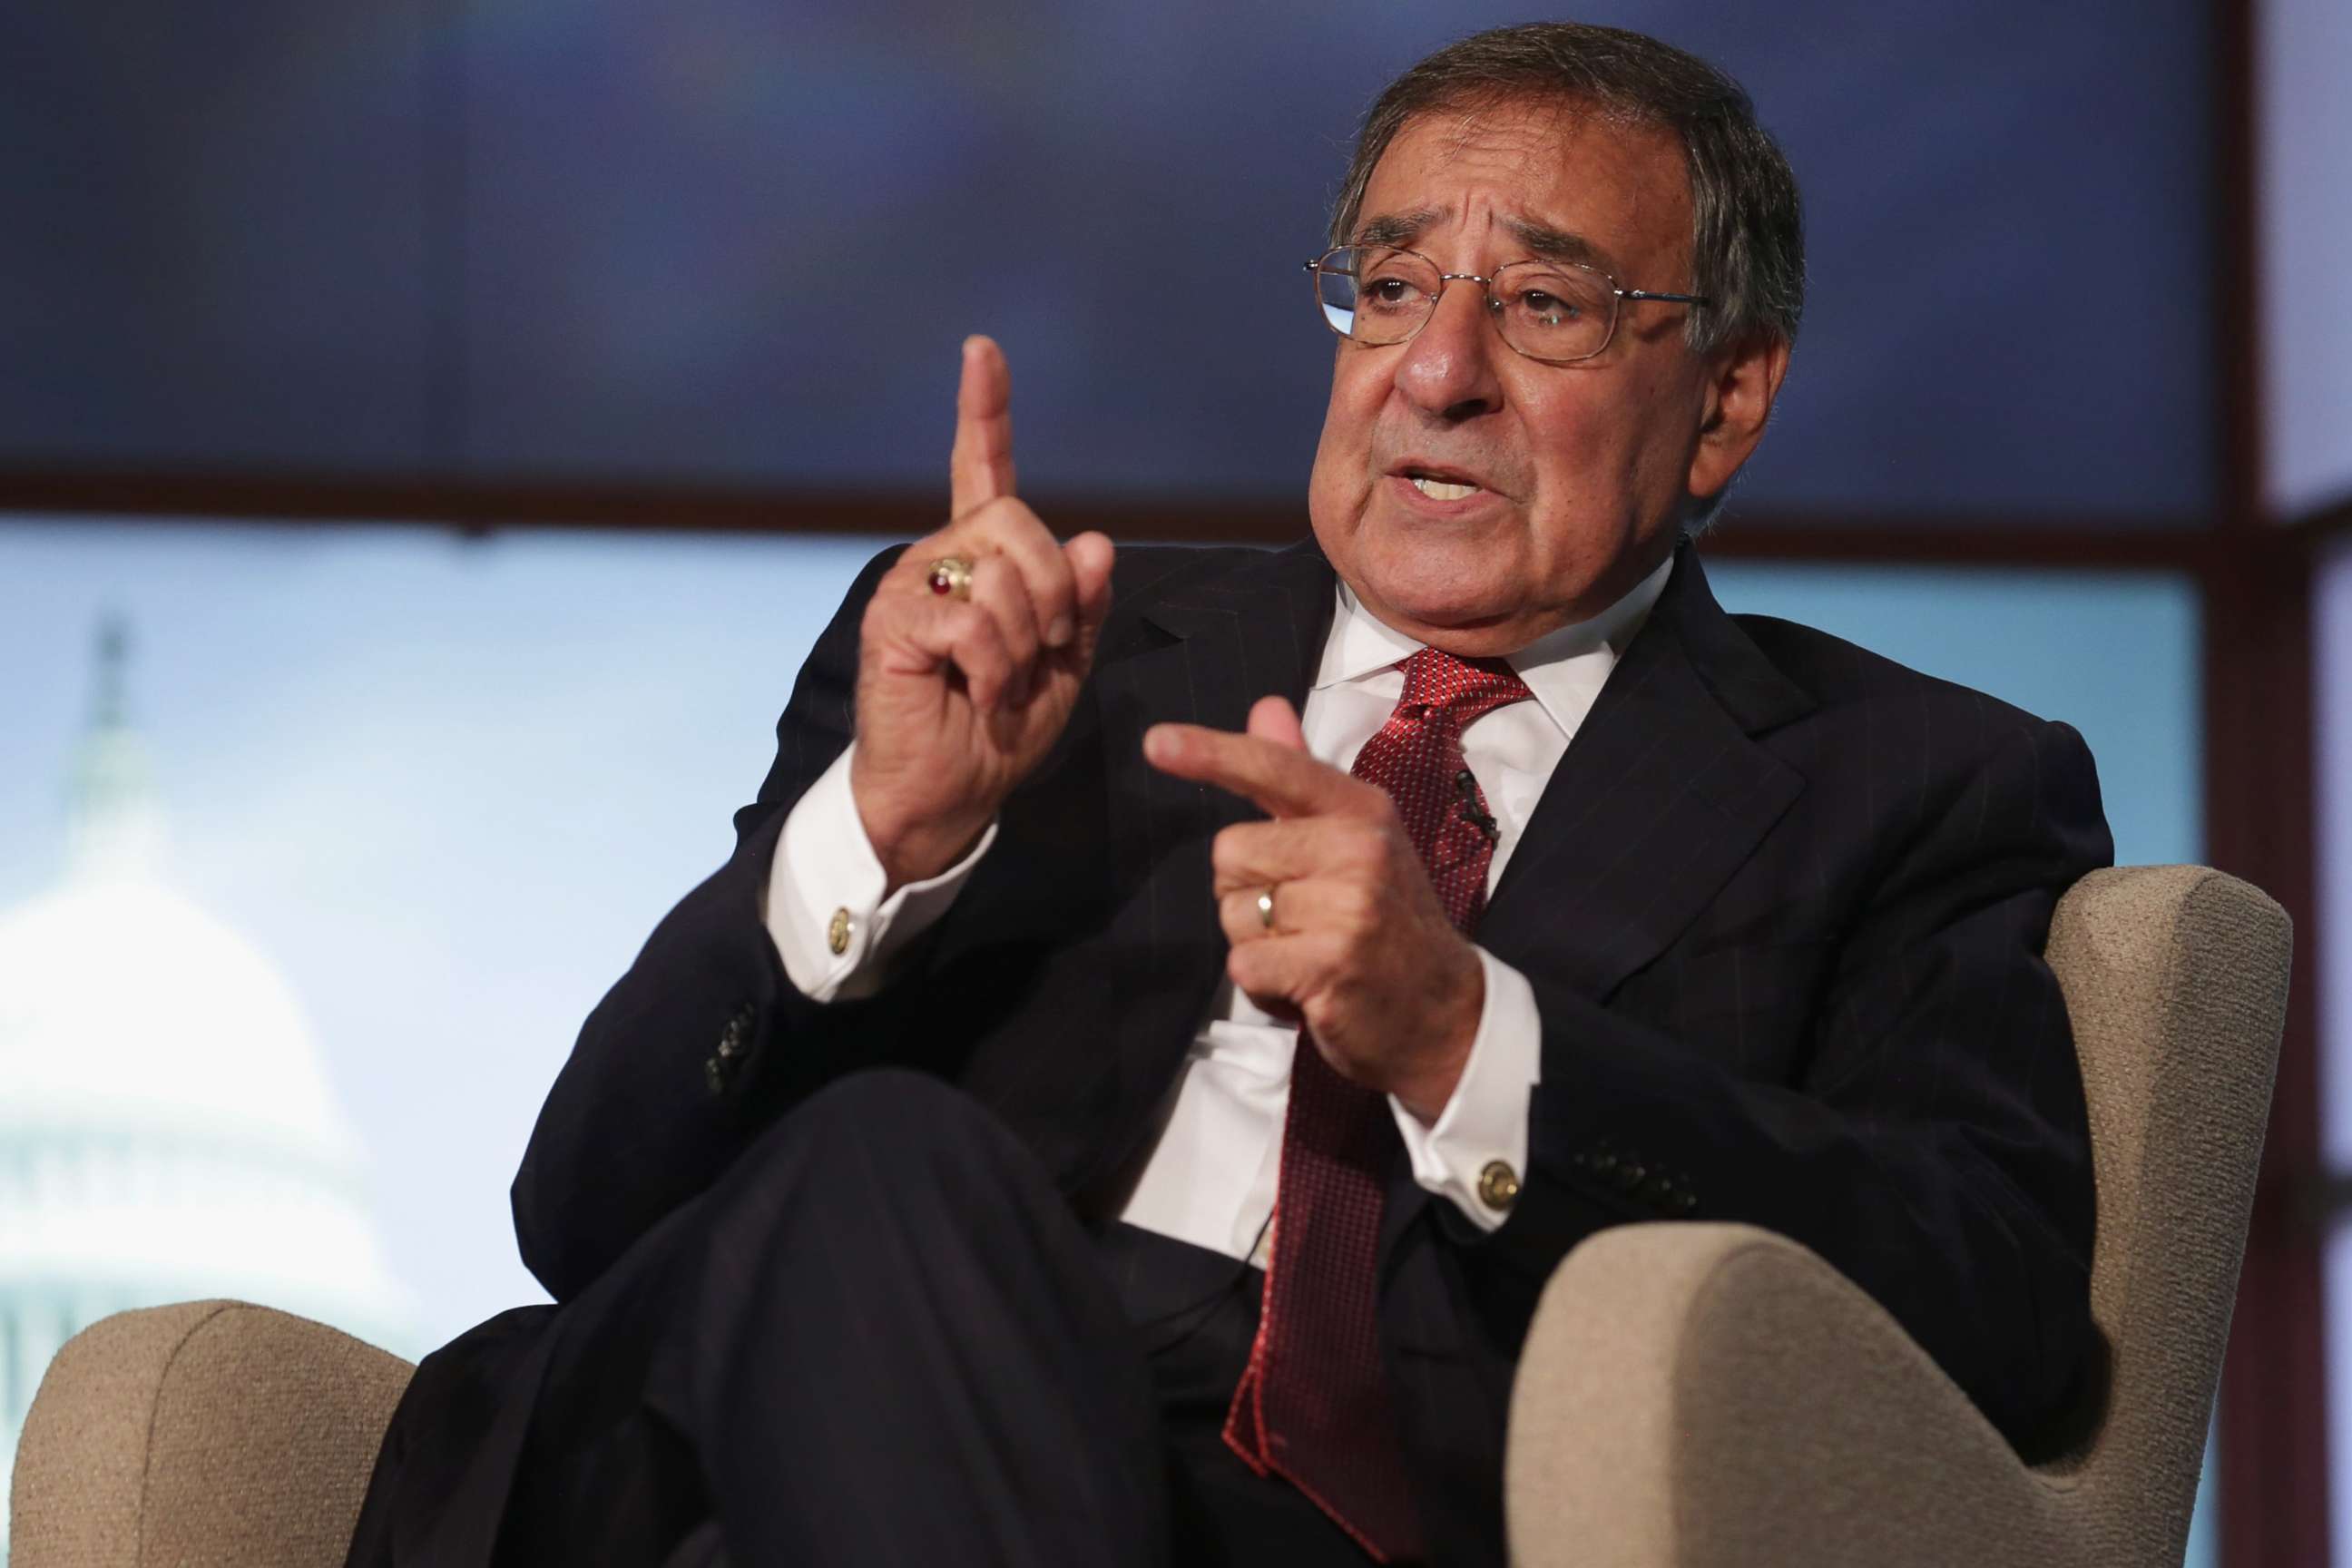 PHOTO: Leon Panetta discuss his new book, "Worthy Fights," during an event in the Jack Morton Auditorium at George Washington University, Oct. 14, 2014 in Washington, D.C.